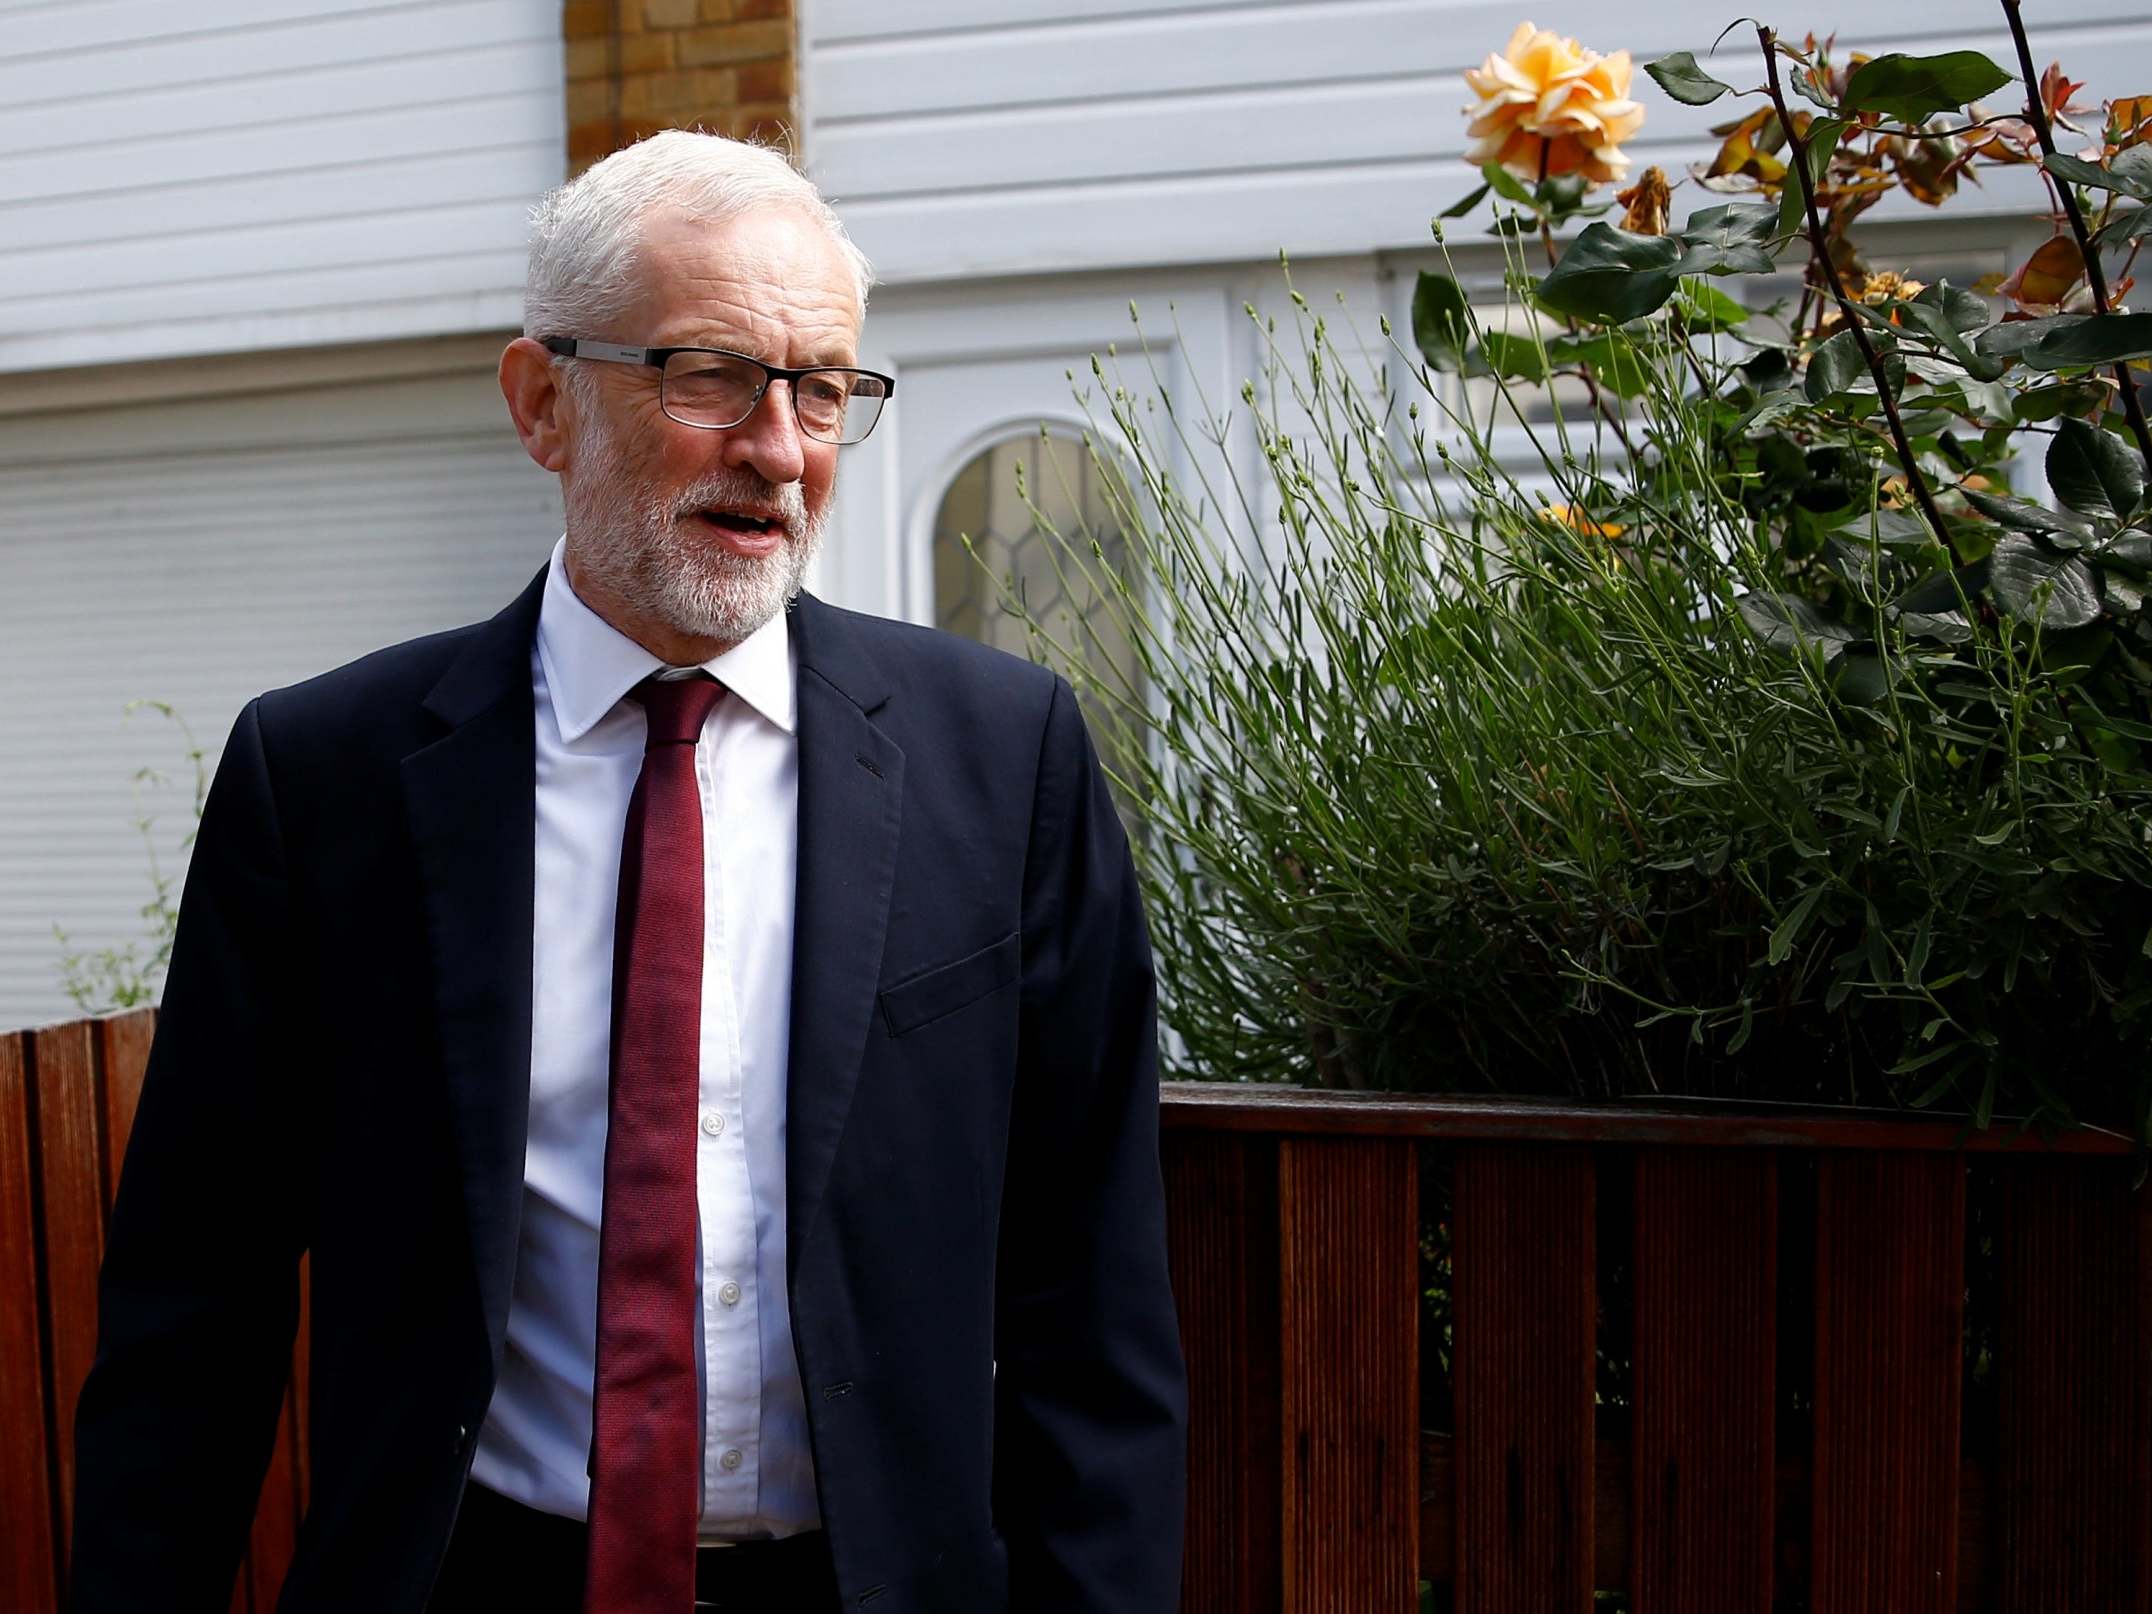 Jeremy Corbyn says public vote is 'only way out of Brexit crisis' amid pressure to explicitly back second referendum